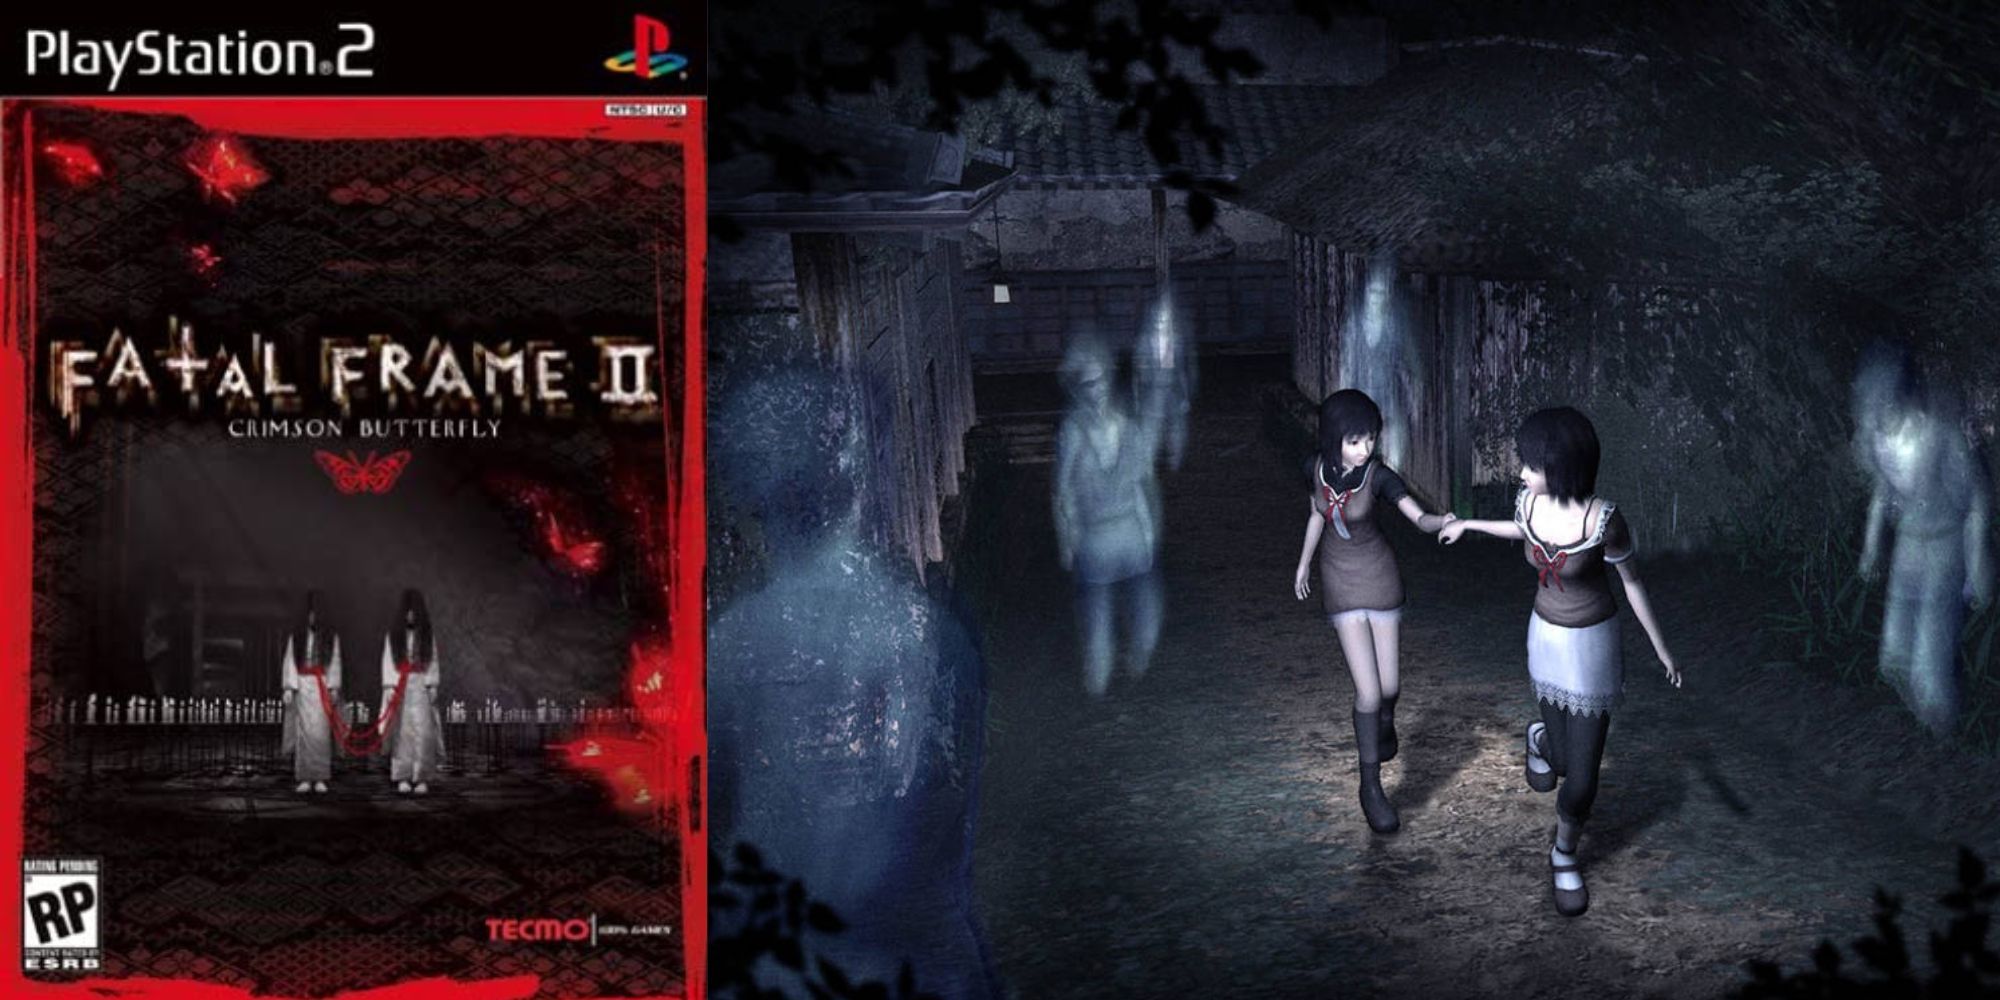 Fatal Frame 2 cover art and in-game image of two girls holding hands